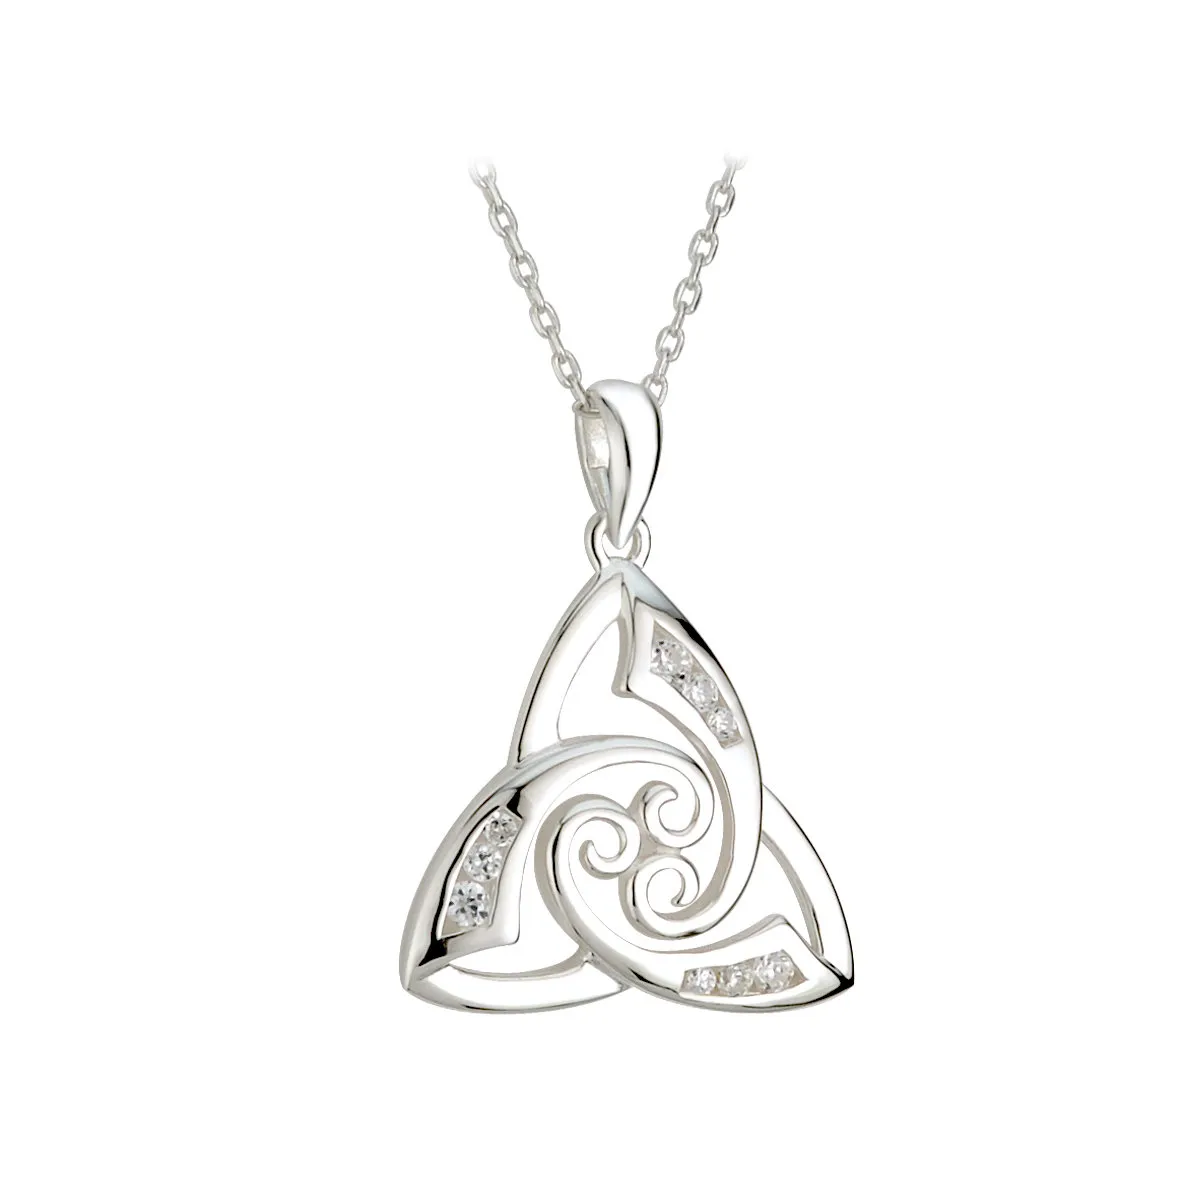 Silver Trinity Knot Spiral Pendant With Cubic Zirconia...